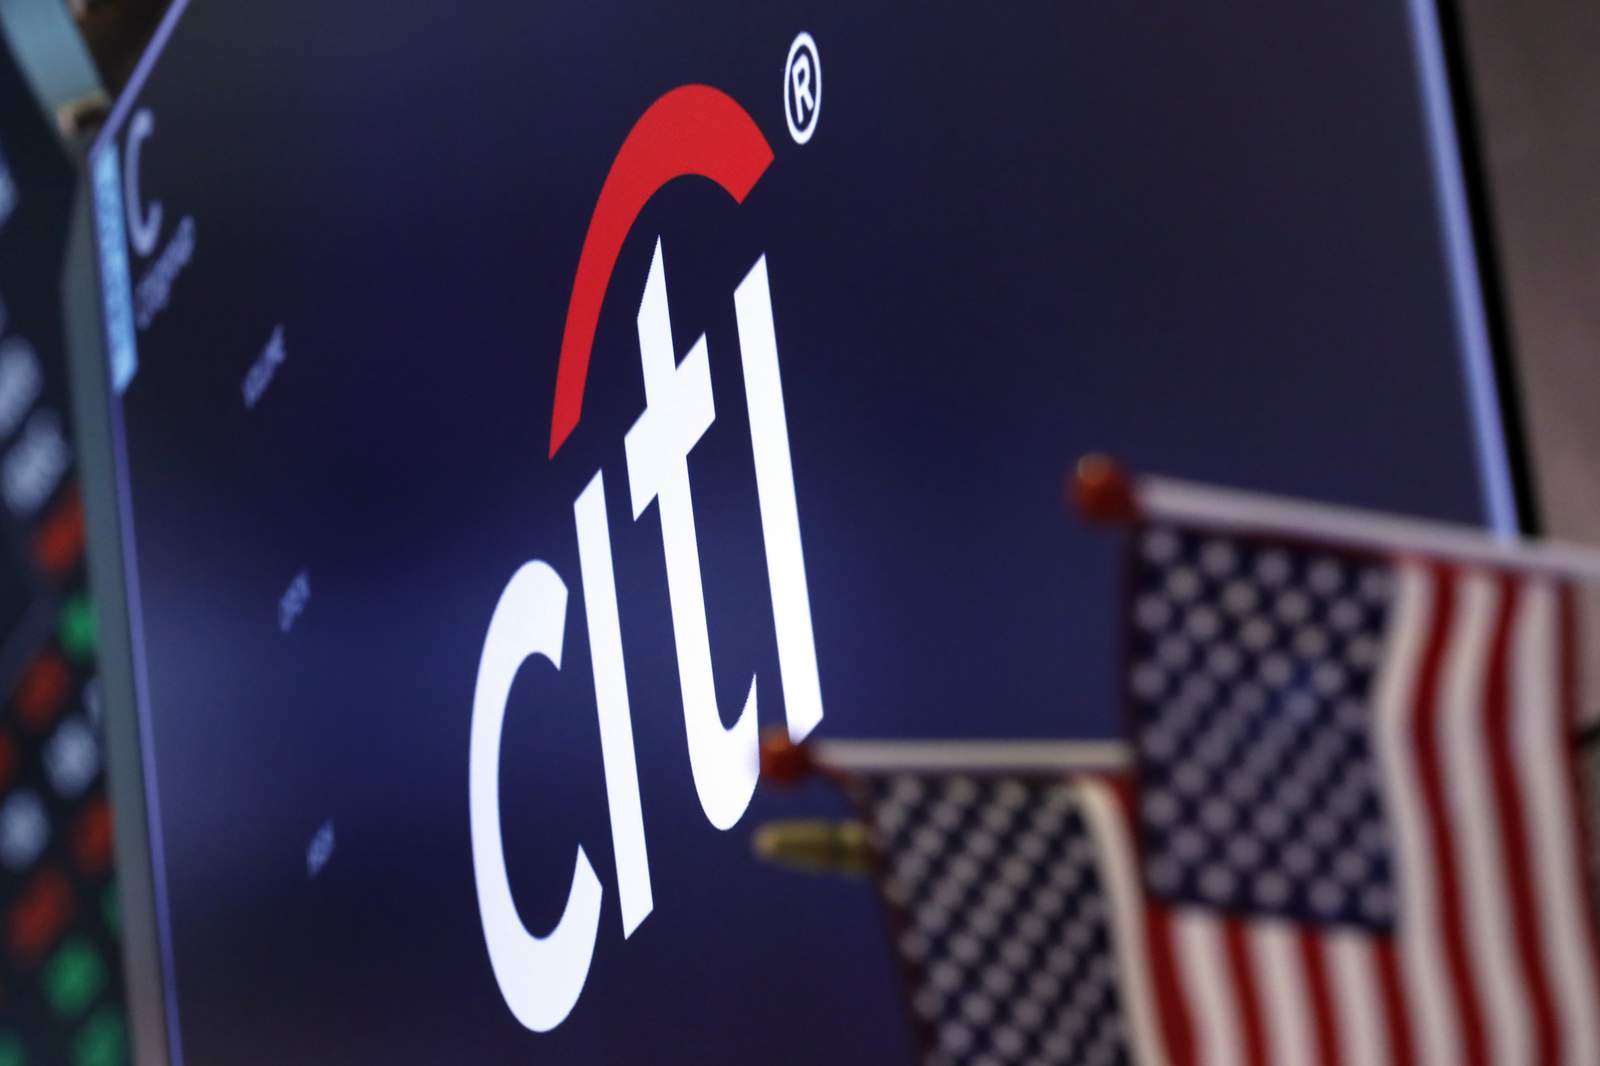 Citi picks Jane Fraser as next CEO, first woman in that role